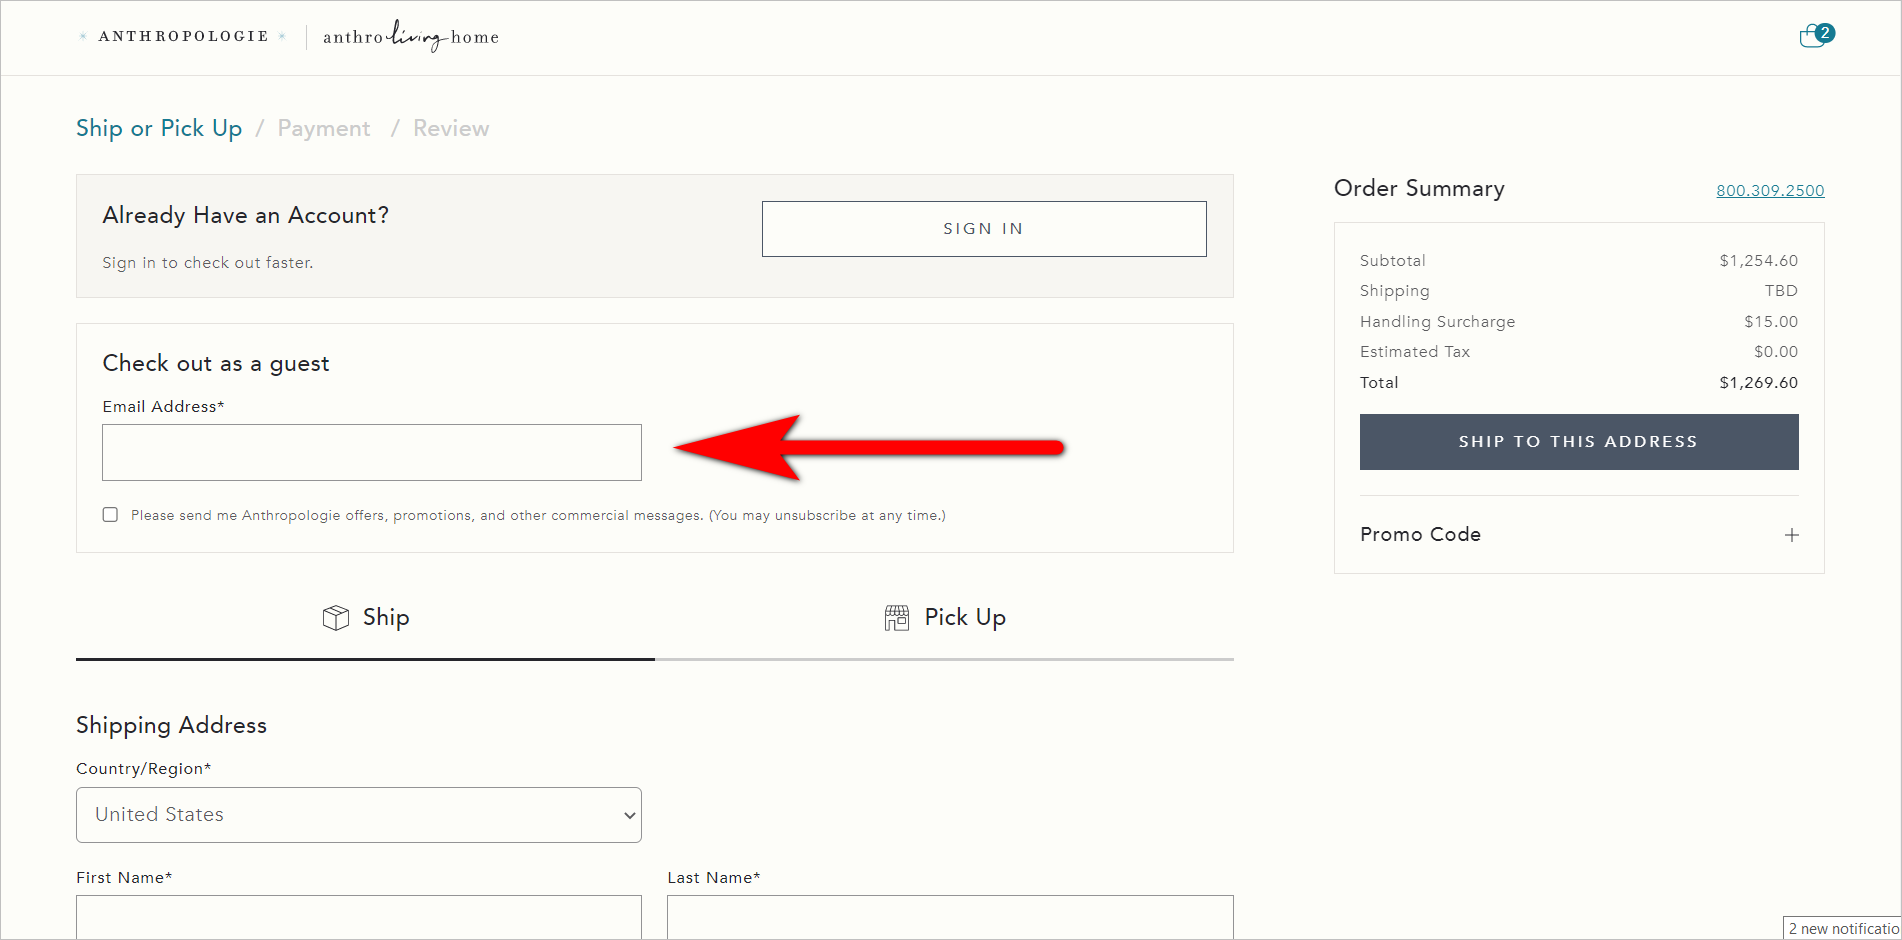 E-commerce checkout best practices example – The top section of Anthropologie’s Ship or Pick up page.